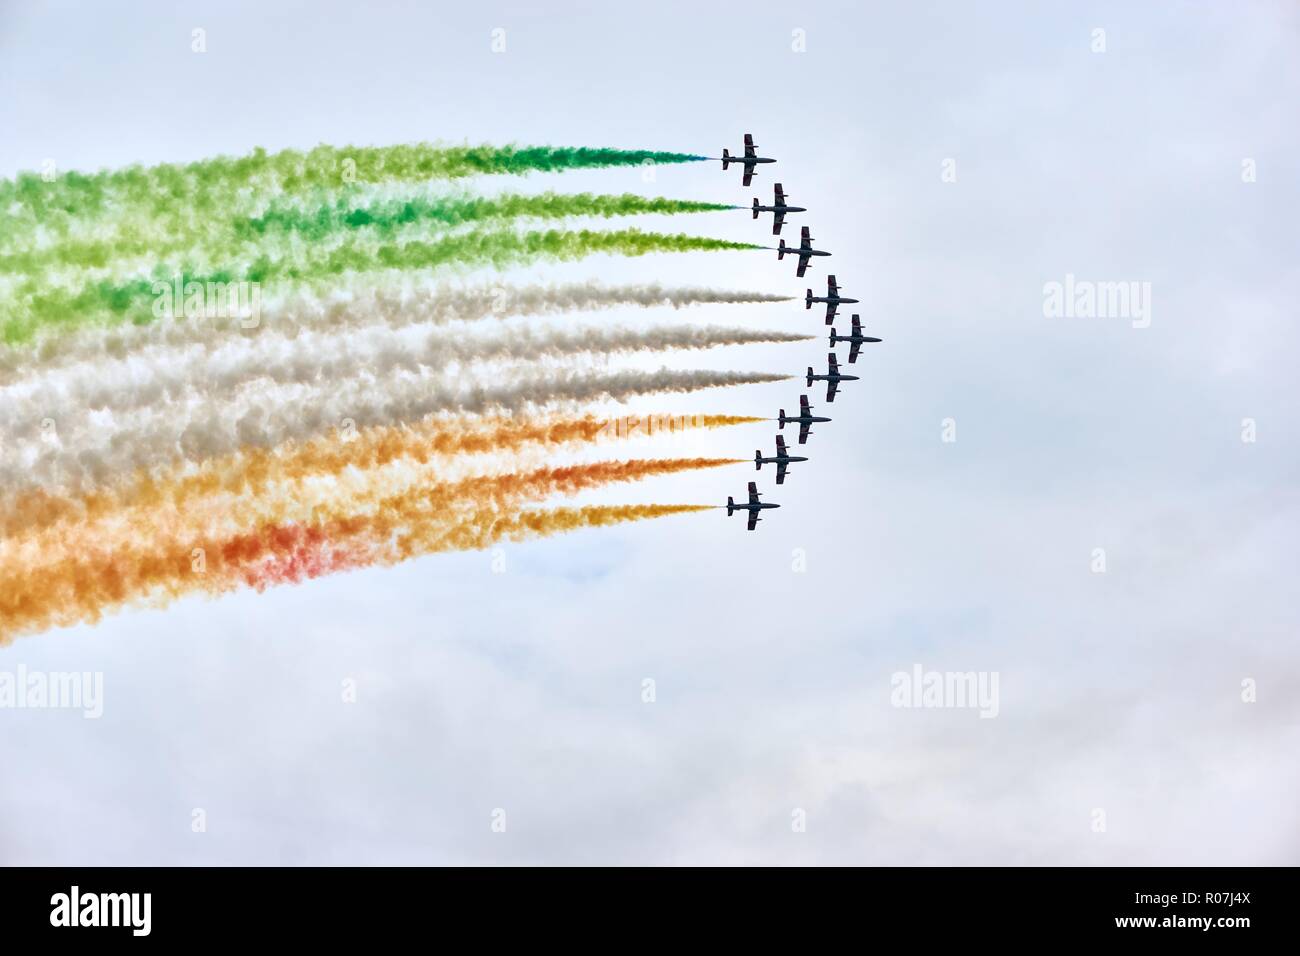 Airforce demonstration wit fighter jets or air planes in v formation with colors of the italian flag against a cloudy sky with copy space Stock Photo